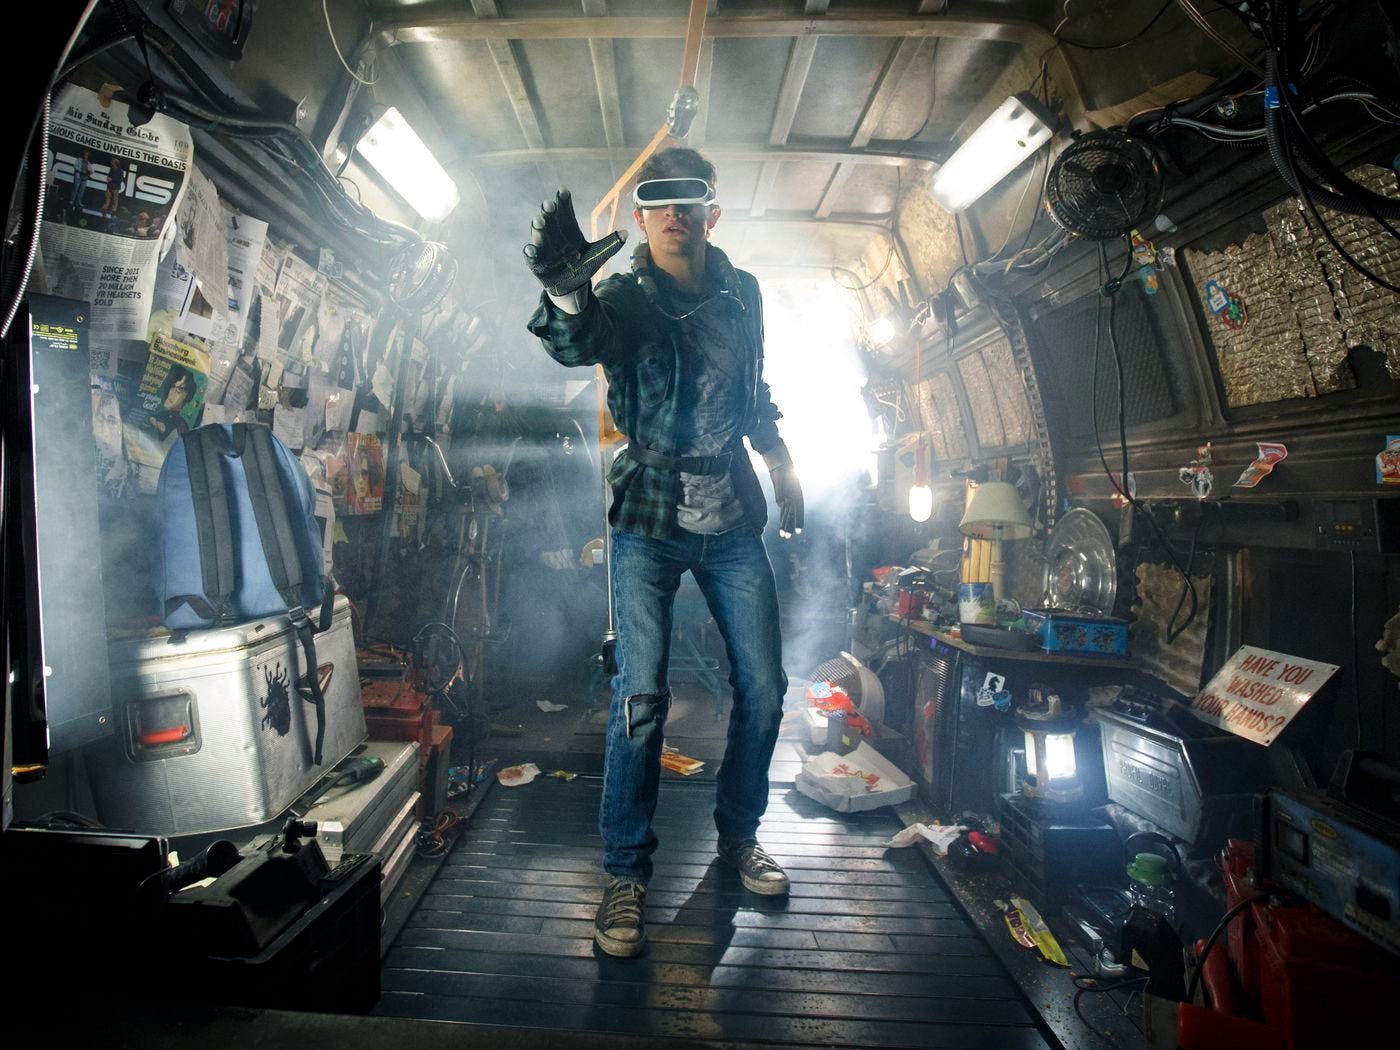 Ready, Player One is an awful book. But the movie could be amazing. - Vox